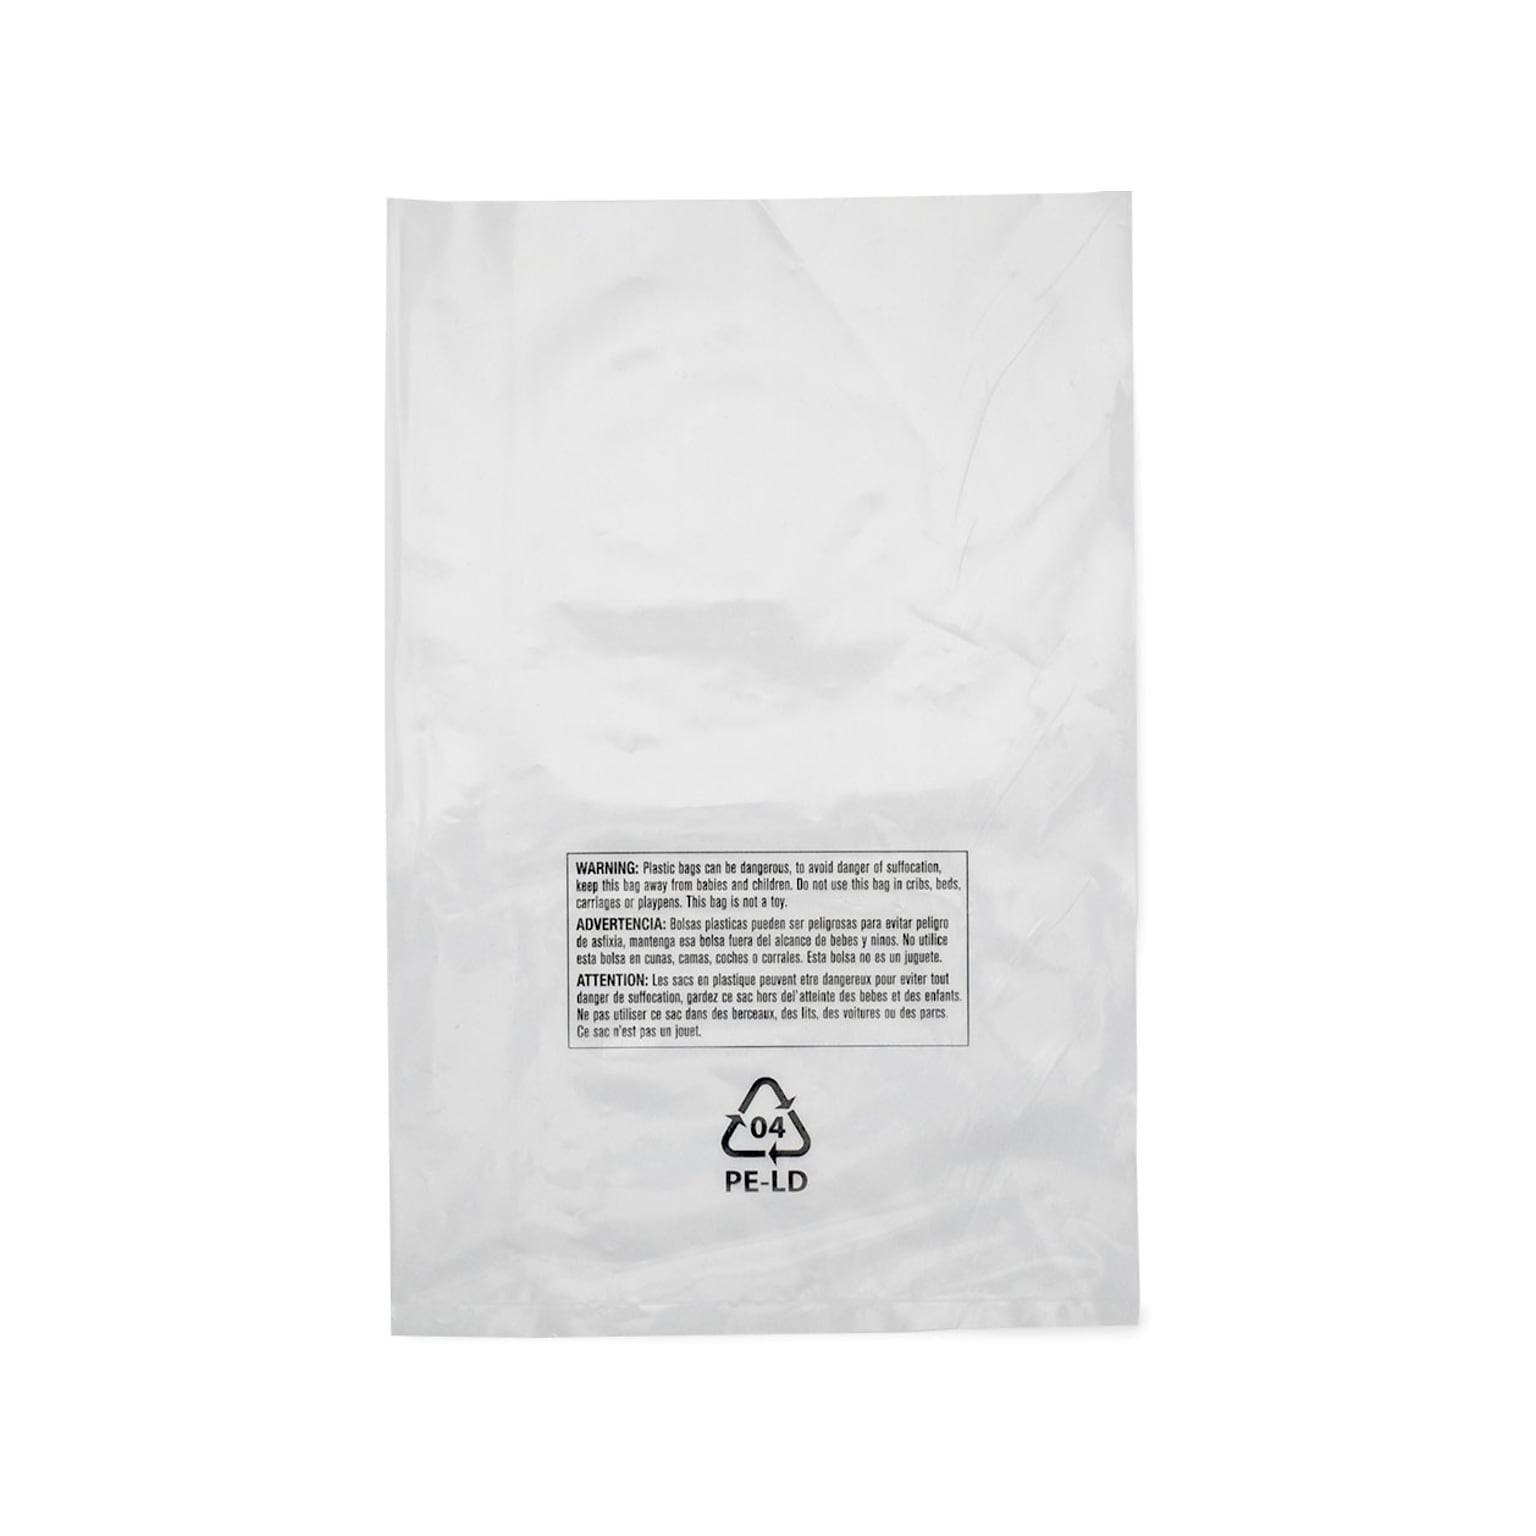 9 x 12 Suffocation Warning Layflat Poly Bags, 2 Mil, Clear, 1000/Carton (16110)